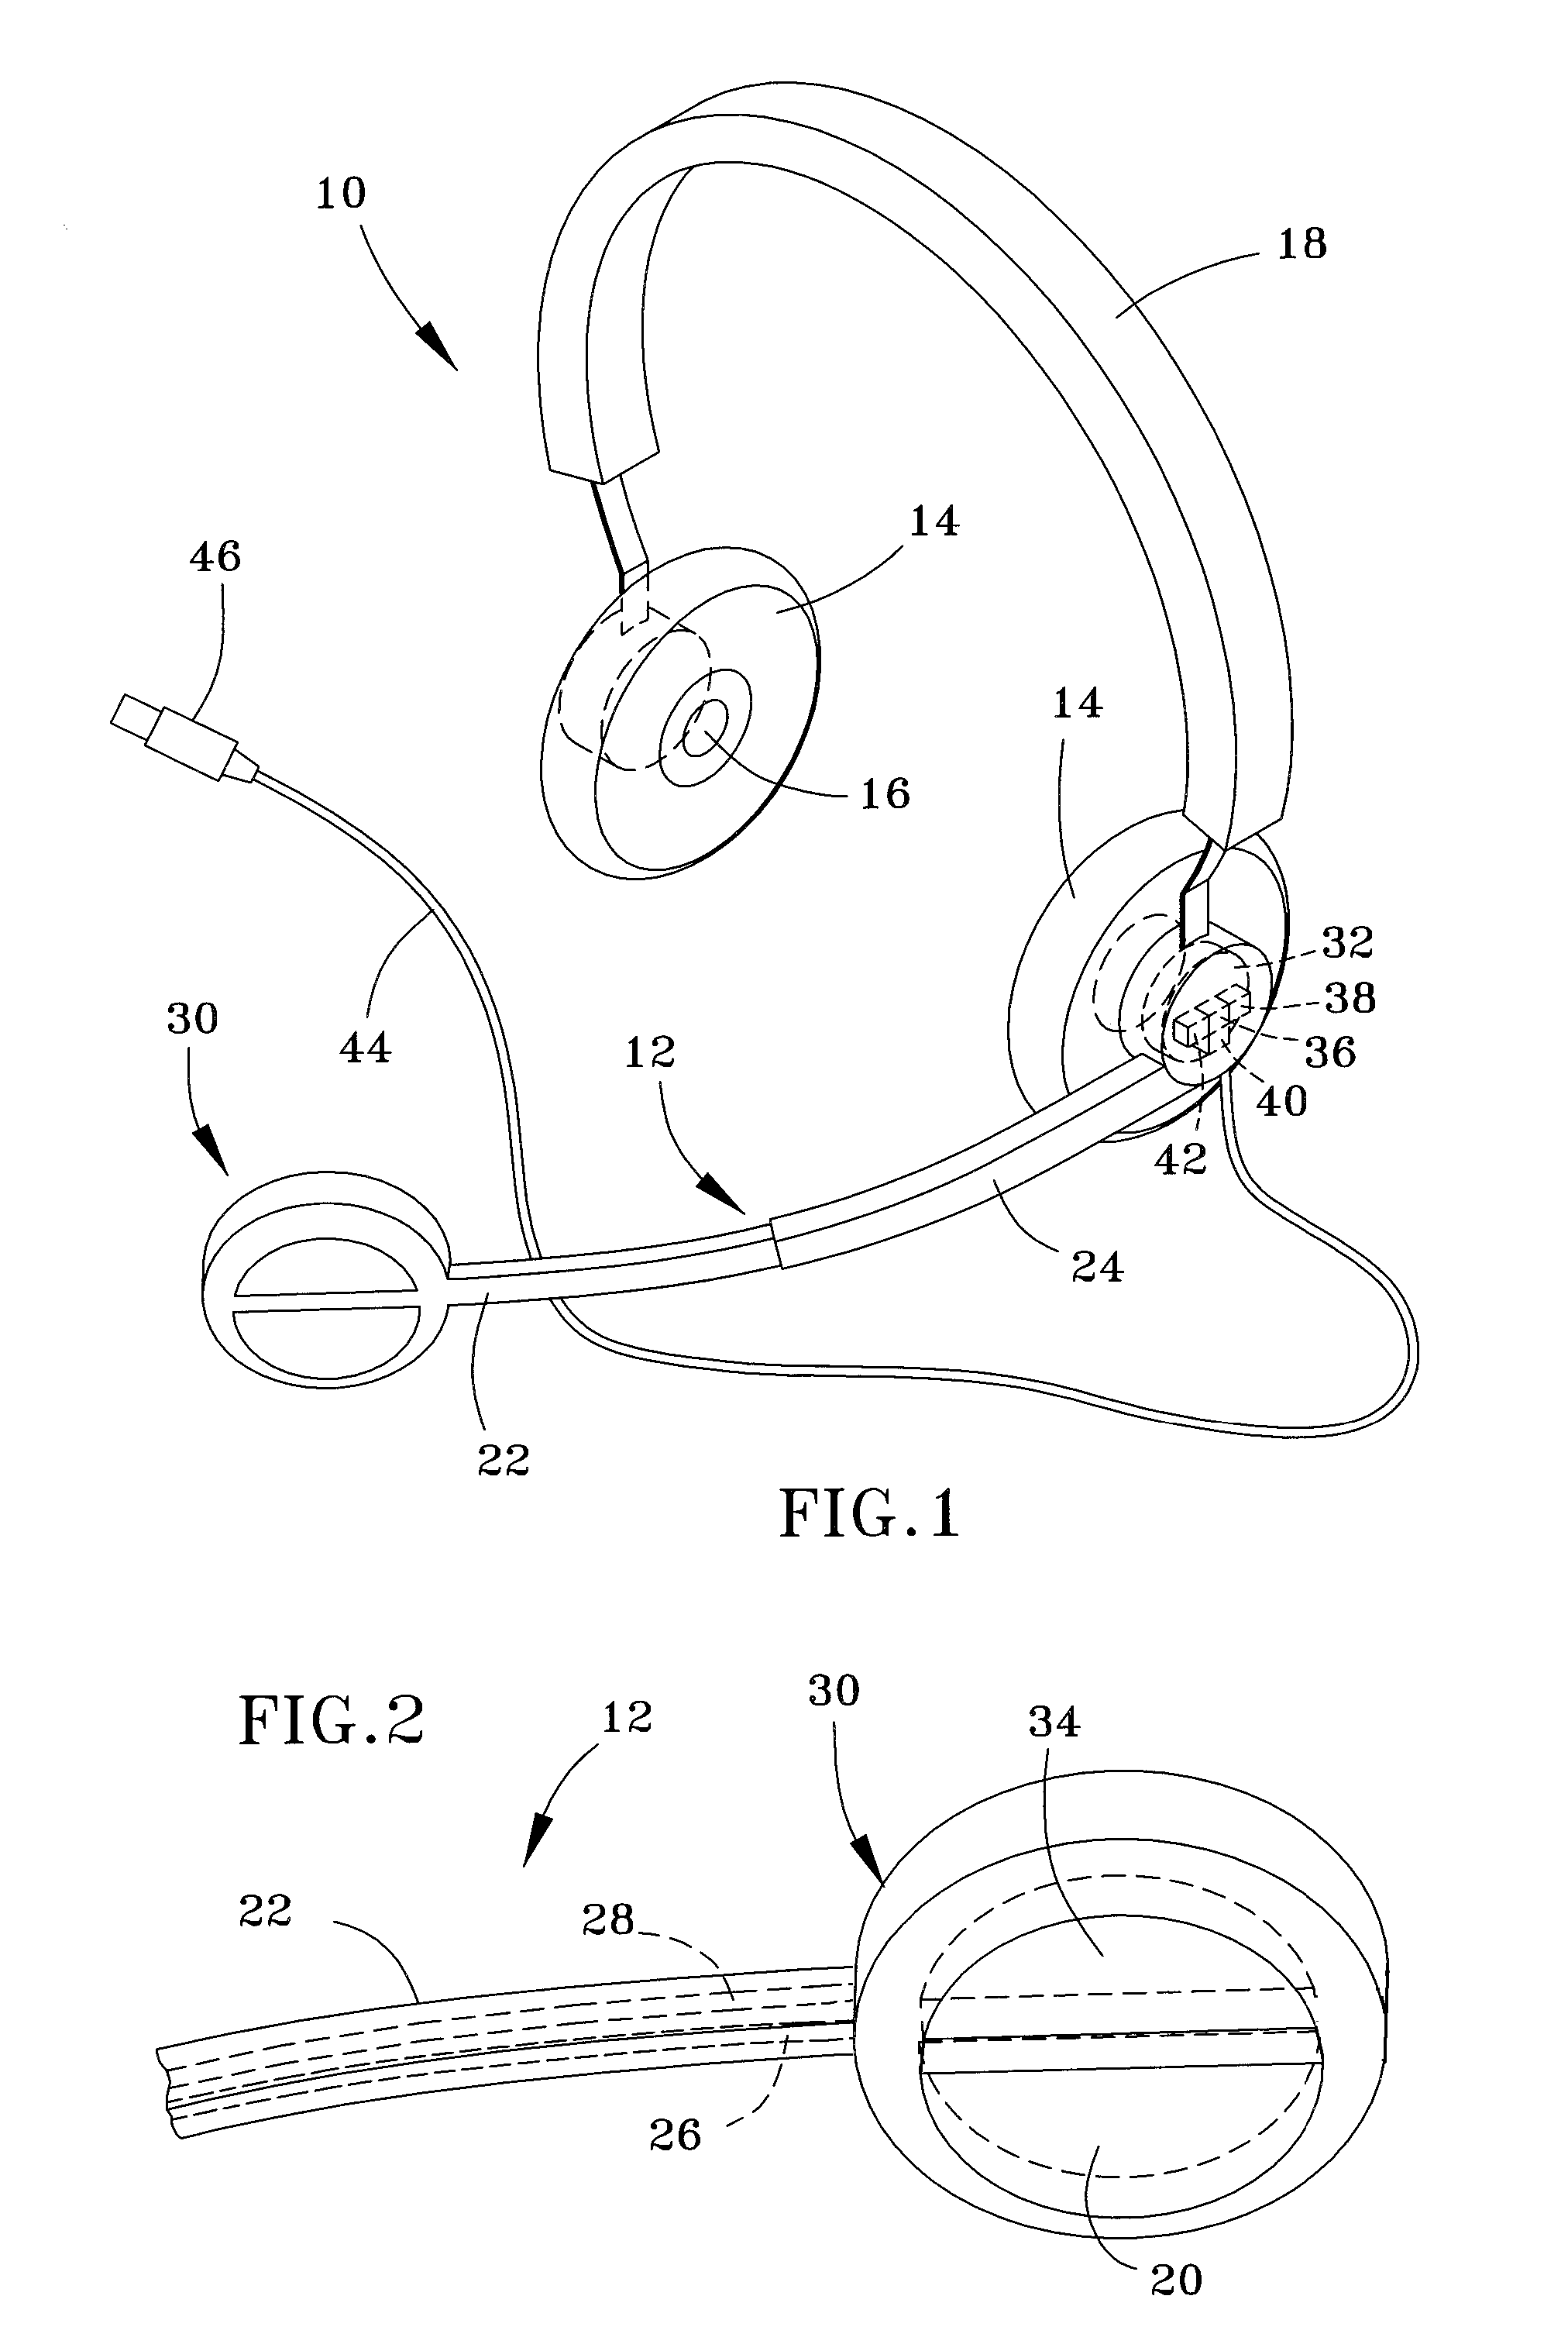 Gaming headset with integrated microphone and adapted for olfactory stimulation